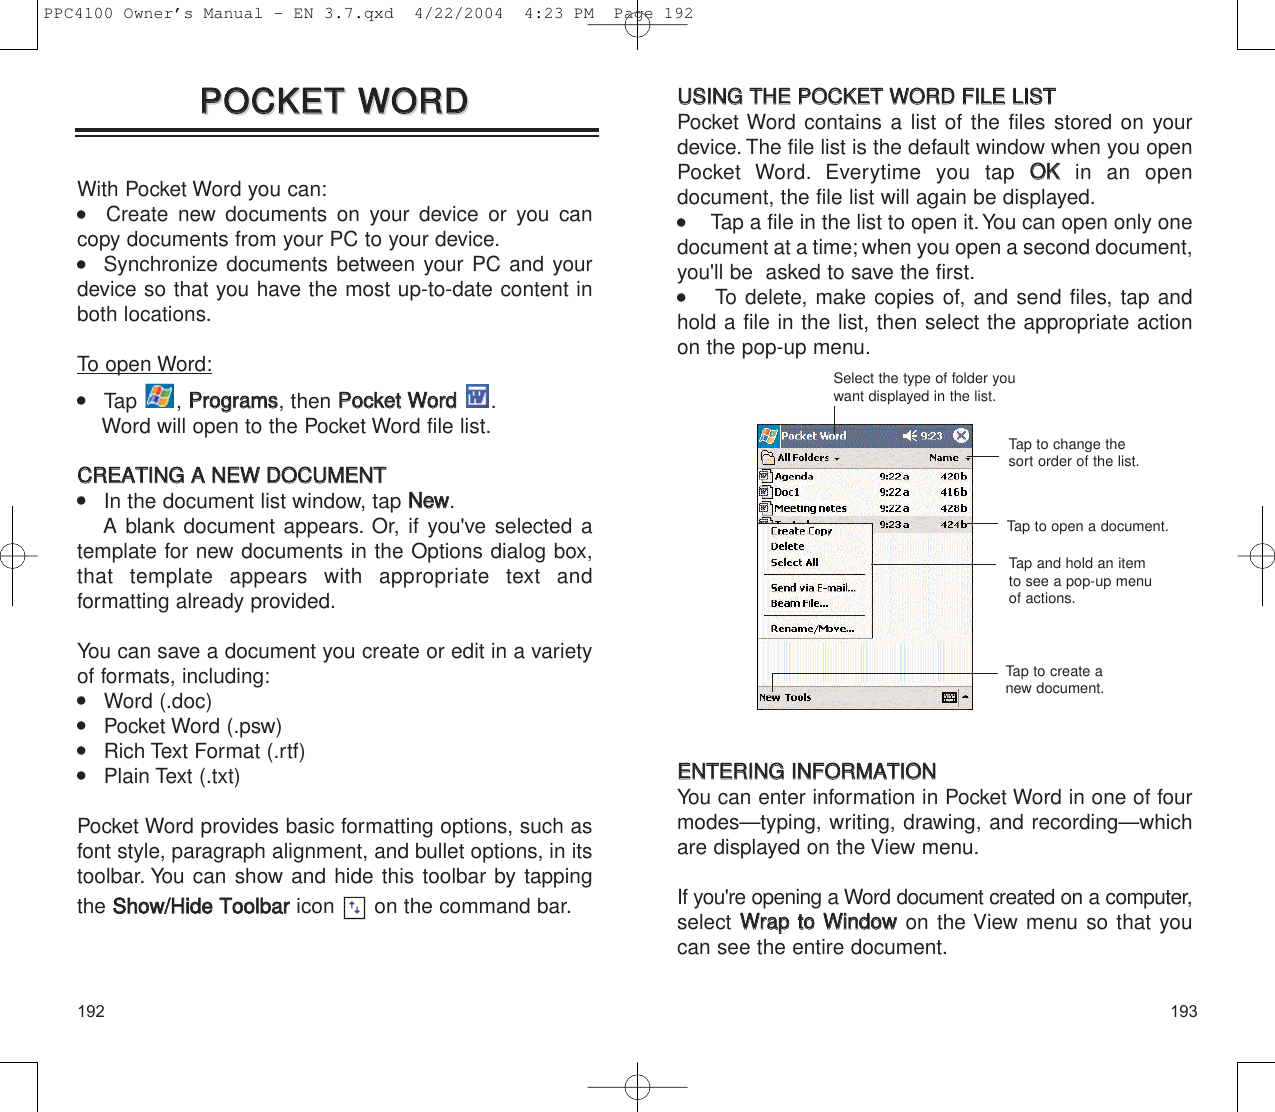 193192UUSSIINNGG  TTHHEE  PPOOCCKKEETT  WWOORRDD  FFIILLEE  LLIISSTTPocket Word contains a list of the files stored on yourdevice. The file list is the default window when you openPocket Word. Everytime you tap OOKKin an open document, the file list will again be displayed.      Tap a file in the list to open it.You can open only onedocument at a time; when you open a second document,you&apos;ll be  asked to save the first.     To delete, make copies of, and send files, tap andhold a file in the list, then select the appropriate actionon the pop-up menu.EENNTTEERRIINNGG  IINNFFOORRMMAATTIIOONNYou can enter information in Pocket Word in one of fourmodes—typing, writing, drawing, and recording—whichare displayed on the View menu.If you&apos;re opening a Word document created on a computer,select WWrraapp  ttoo  WWiinnddoowwon the View menu so that youcan see the entire document.Select the type of folder youwant displayed in the list.Tap to change thesort order of the list.Tap to open a document.Tap and hold an itemto see a pop-up menuof actions.Tap to create anew document.PPOOCCKKEETT  WWOORRDDPPOOCCKKEETT  WWOORRDDWith Pocket Word you can:   Create new documents on your device or you cancopy documents from your PC to your device.   Synchronize documents between your PC and yourdevice so that you have the most up-to-date content inboth locations.To open Word:    Tap , PPrrooggrraammss, then PPoocckkeett  WWoorrdd.Word will open to the Pocket Word file list.CCRREEAATTIINNGG  AA  NNEEWW  DDOOCCUUMMEENNTT    In the document list window, tap NNeeww.A blank document appears. Or, if you&apos;ve selected atemplate for new documents in the Options dialog box,that template appears with appropriate text and formatting already provided.You can save a document you create or edit in a varietyof formats, including:    Word (.doc)    Pocket Word (.psw)    Rich Text Format (.rtf)    Plain Text (.txt)Pocket Word provides basic formatting options, such asfont style, paragraph alignment, and bullet options, in itstoolbar. You can show and hide this toolbar by tappingthe SShhooww//HHiiddee  TToooollbbaarricon  on the command bar.PPC4100 Owner’s Manual - EN 3.7.qxd  4/22/2004  4:23 PM  Page 192